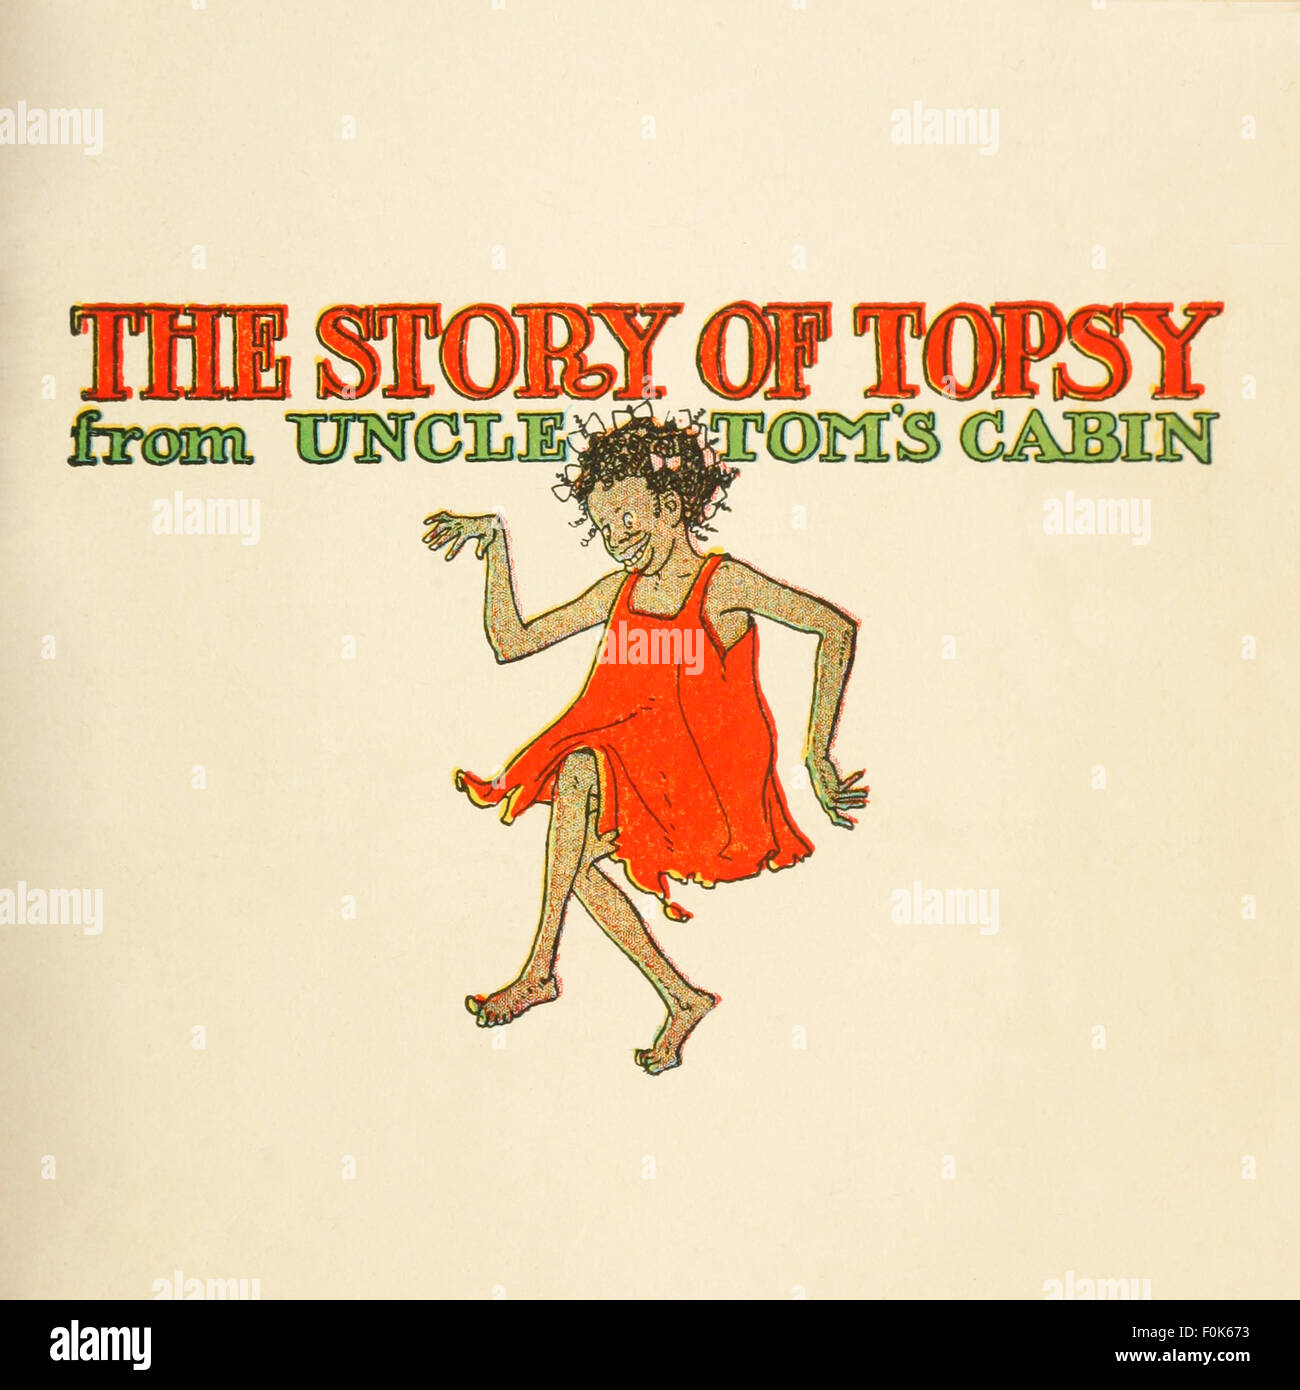 Title page from 'The Story of Topsy from Uncle Tom's Cabin' illustrated by John R. Neill (1877-1943) and published in 1908. See description for more information. Stock Photo